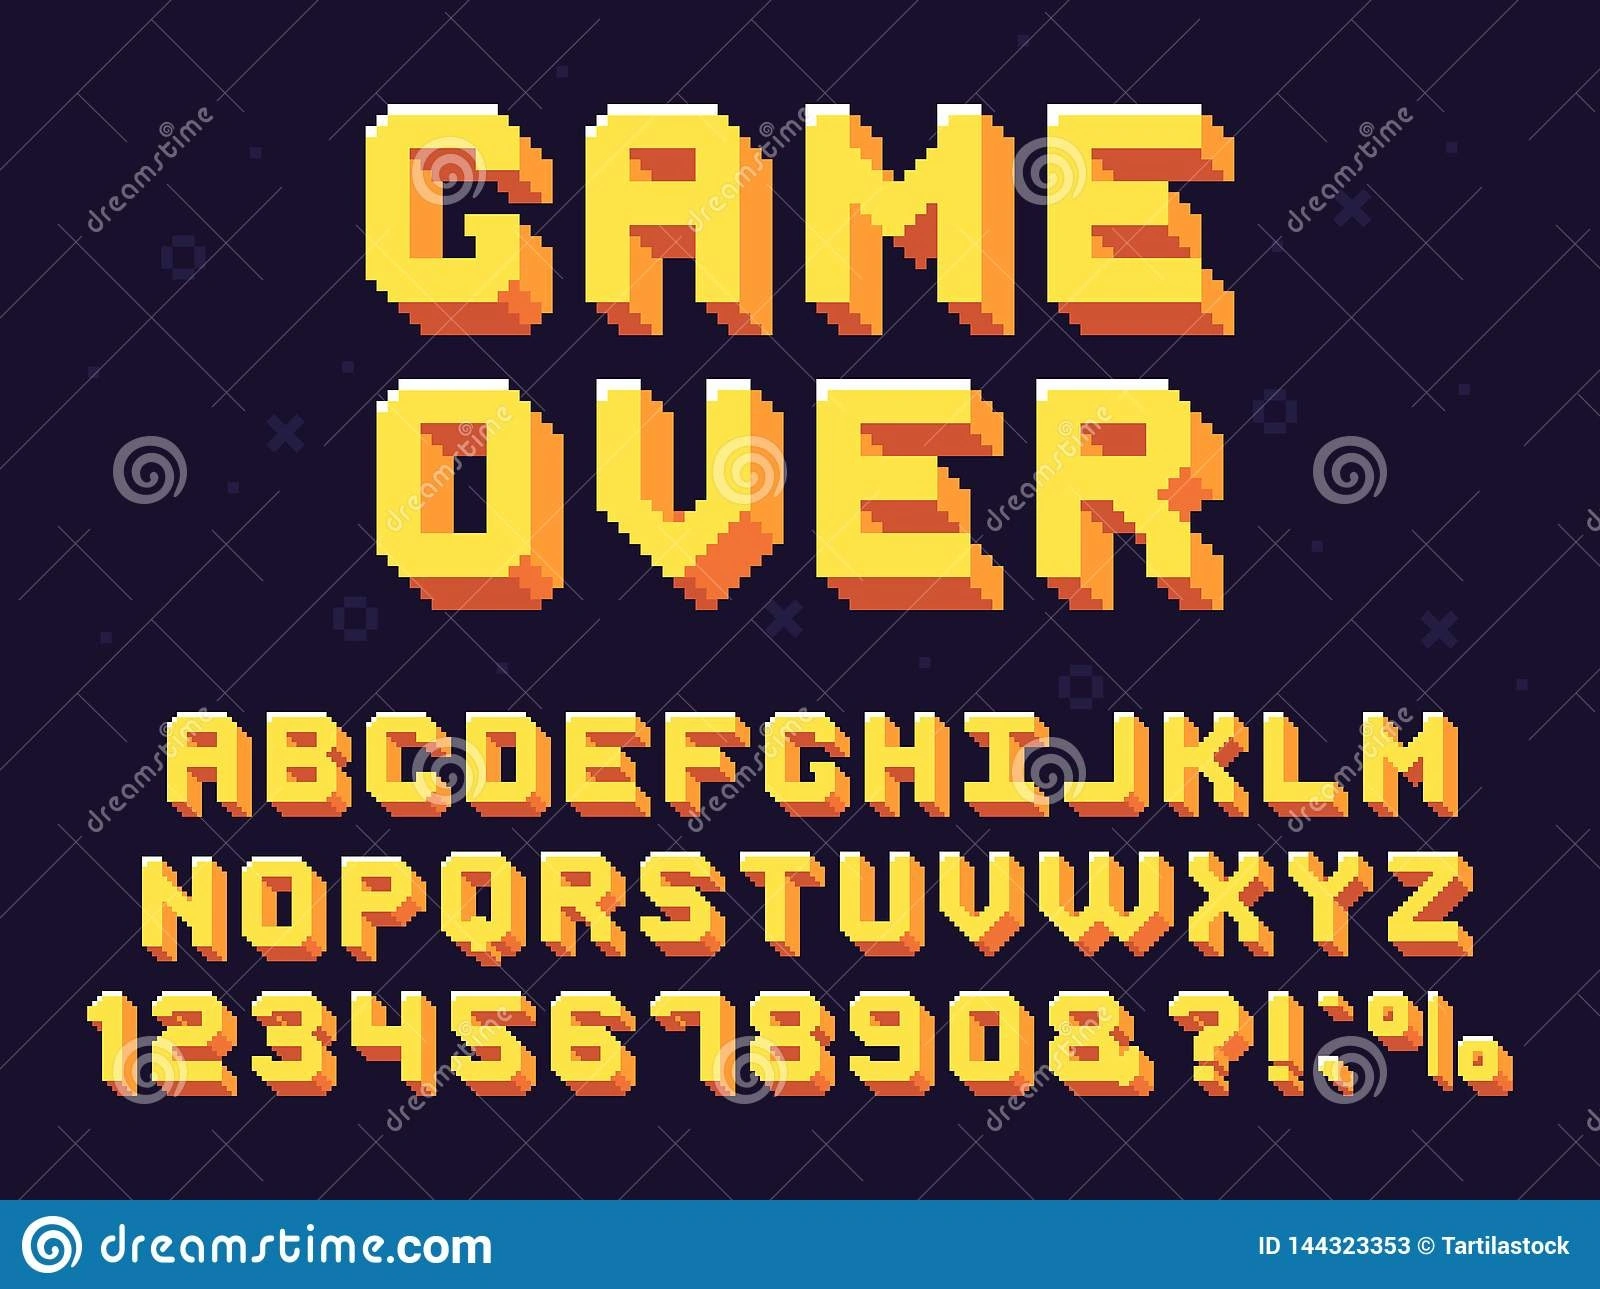 pixel-game-font-retro-games-text-s-gaming-alphabet-bit-computer-graphic-letters-vector-set-pixelated-typeface-letter-arcade-144323353